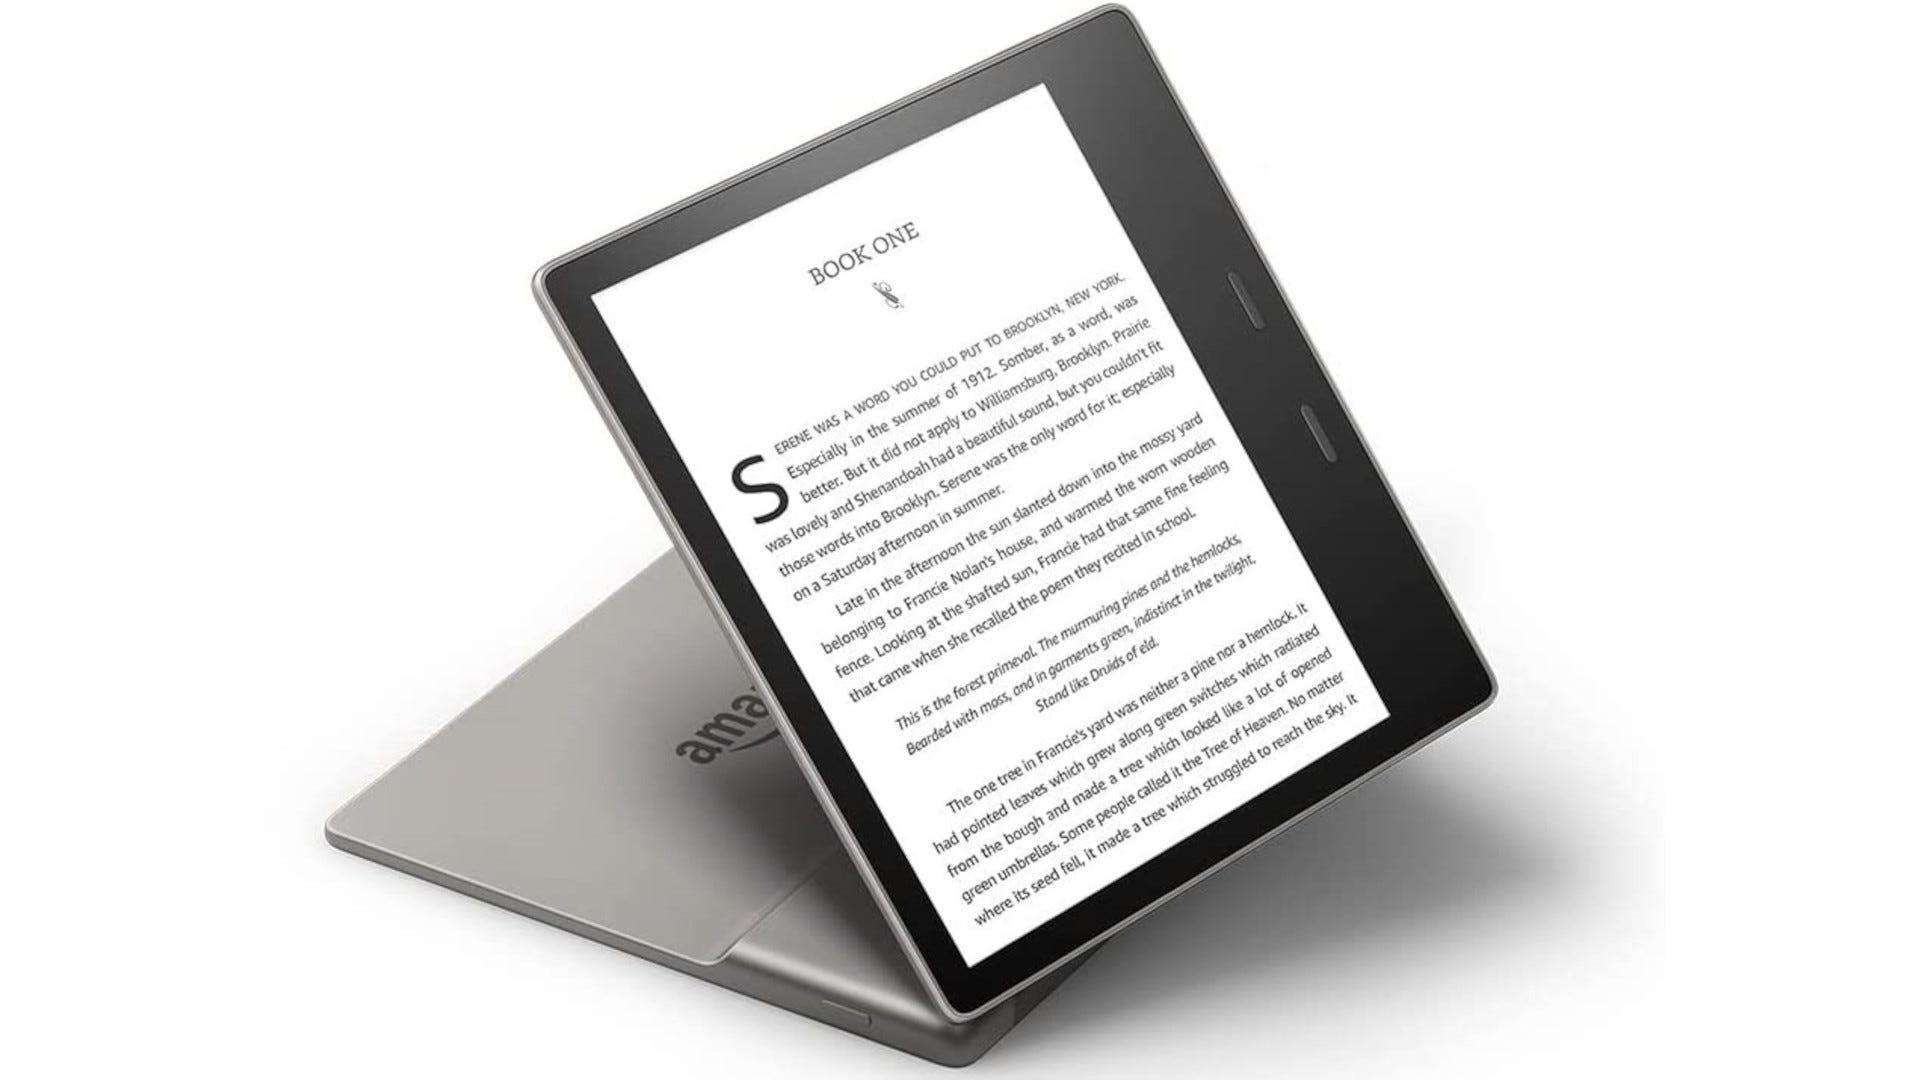  A Kindle Oasis is displayed with text on the screen.